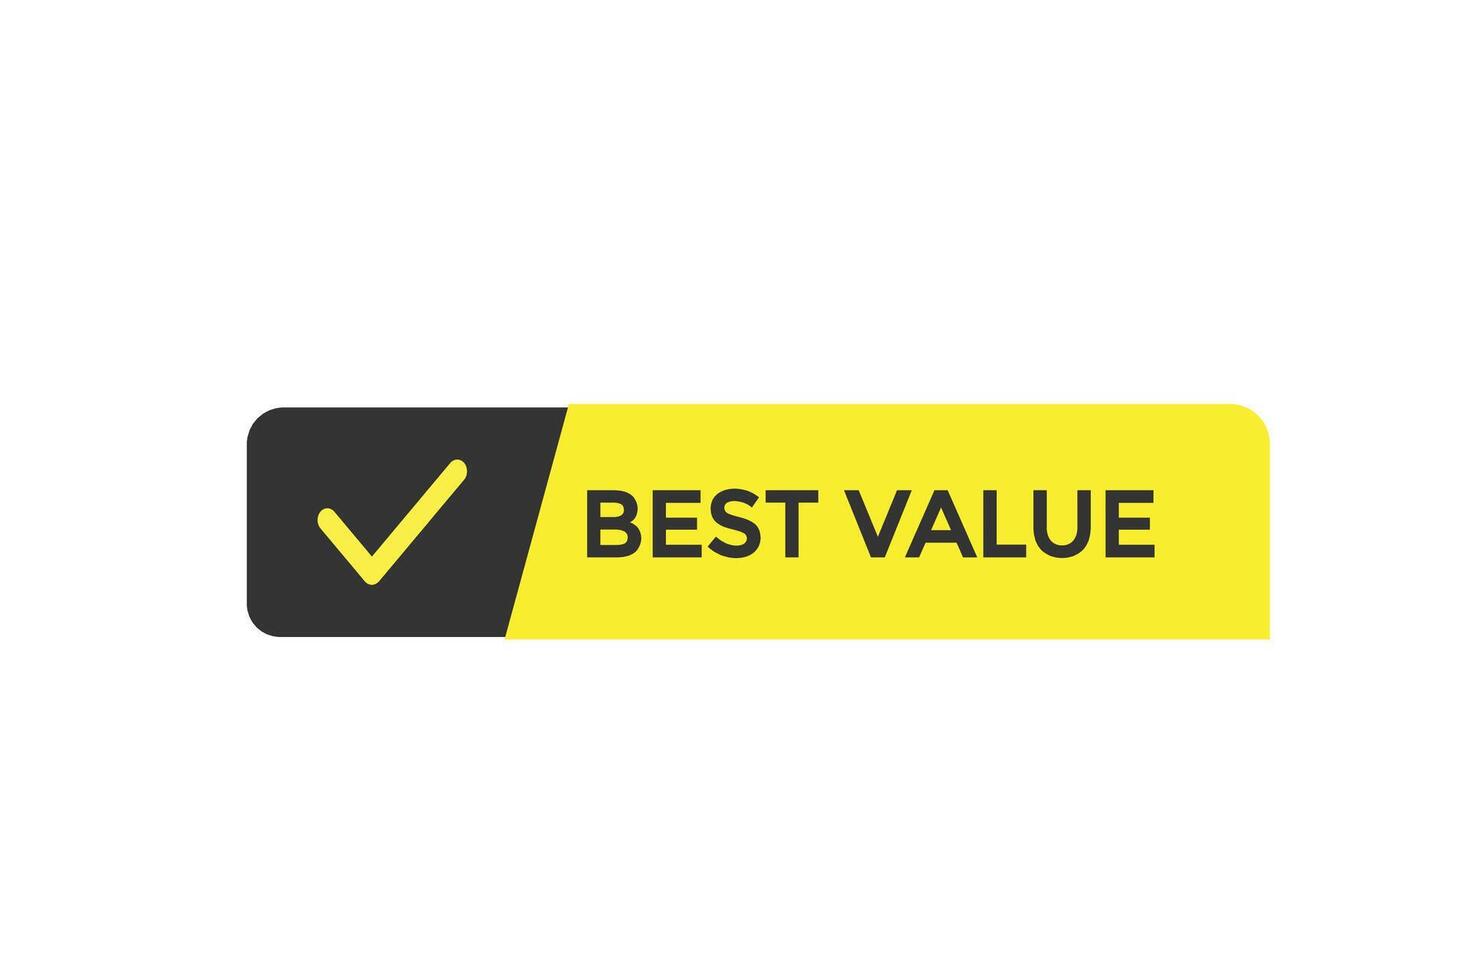 new website best value click button learn stay stay tuned, level, sign, speech, bubble banner modern, symbol, click, vector